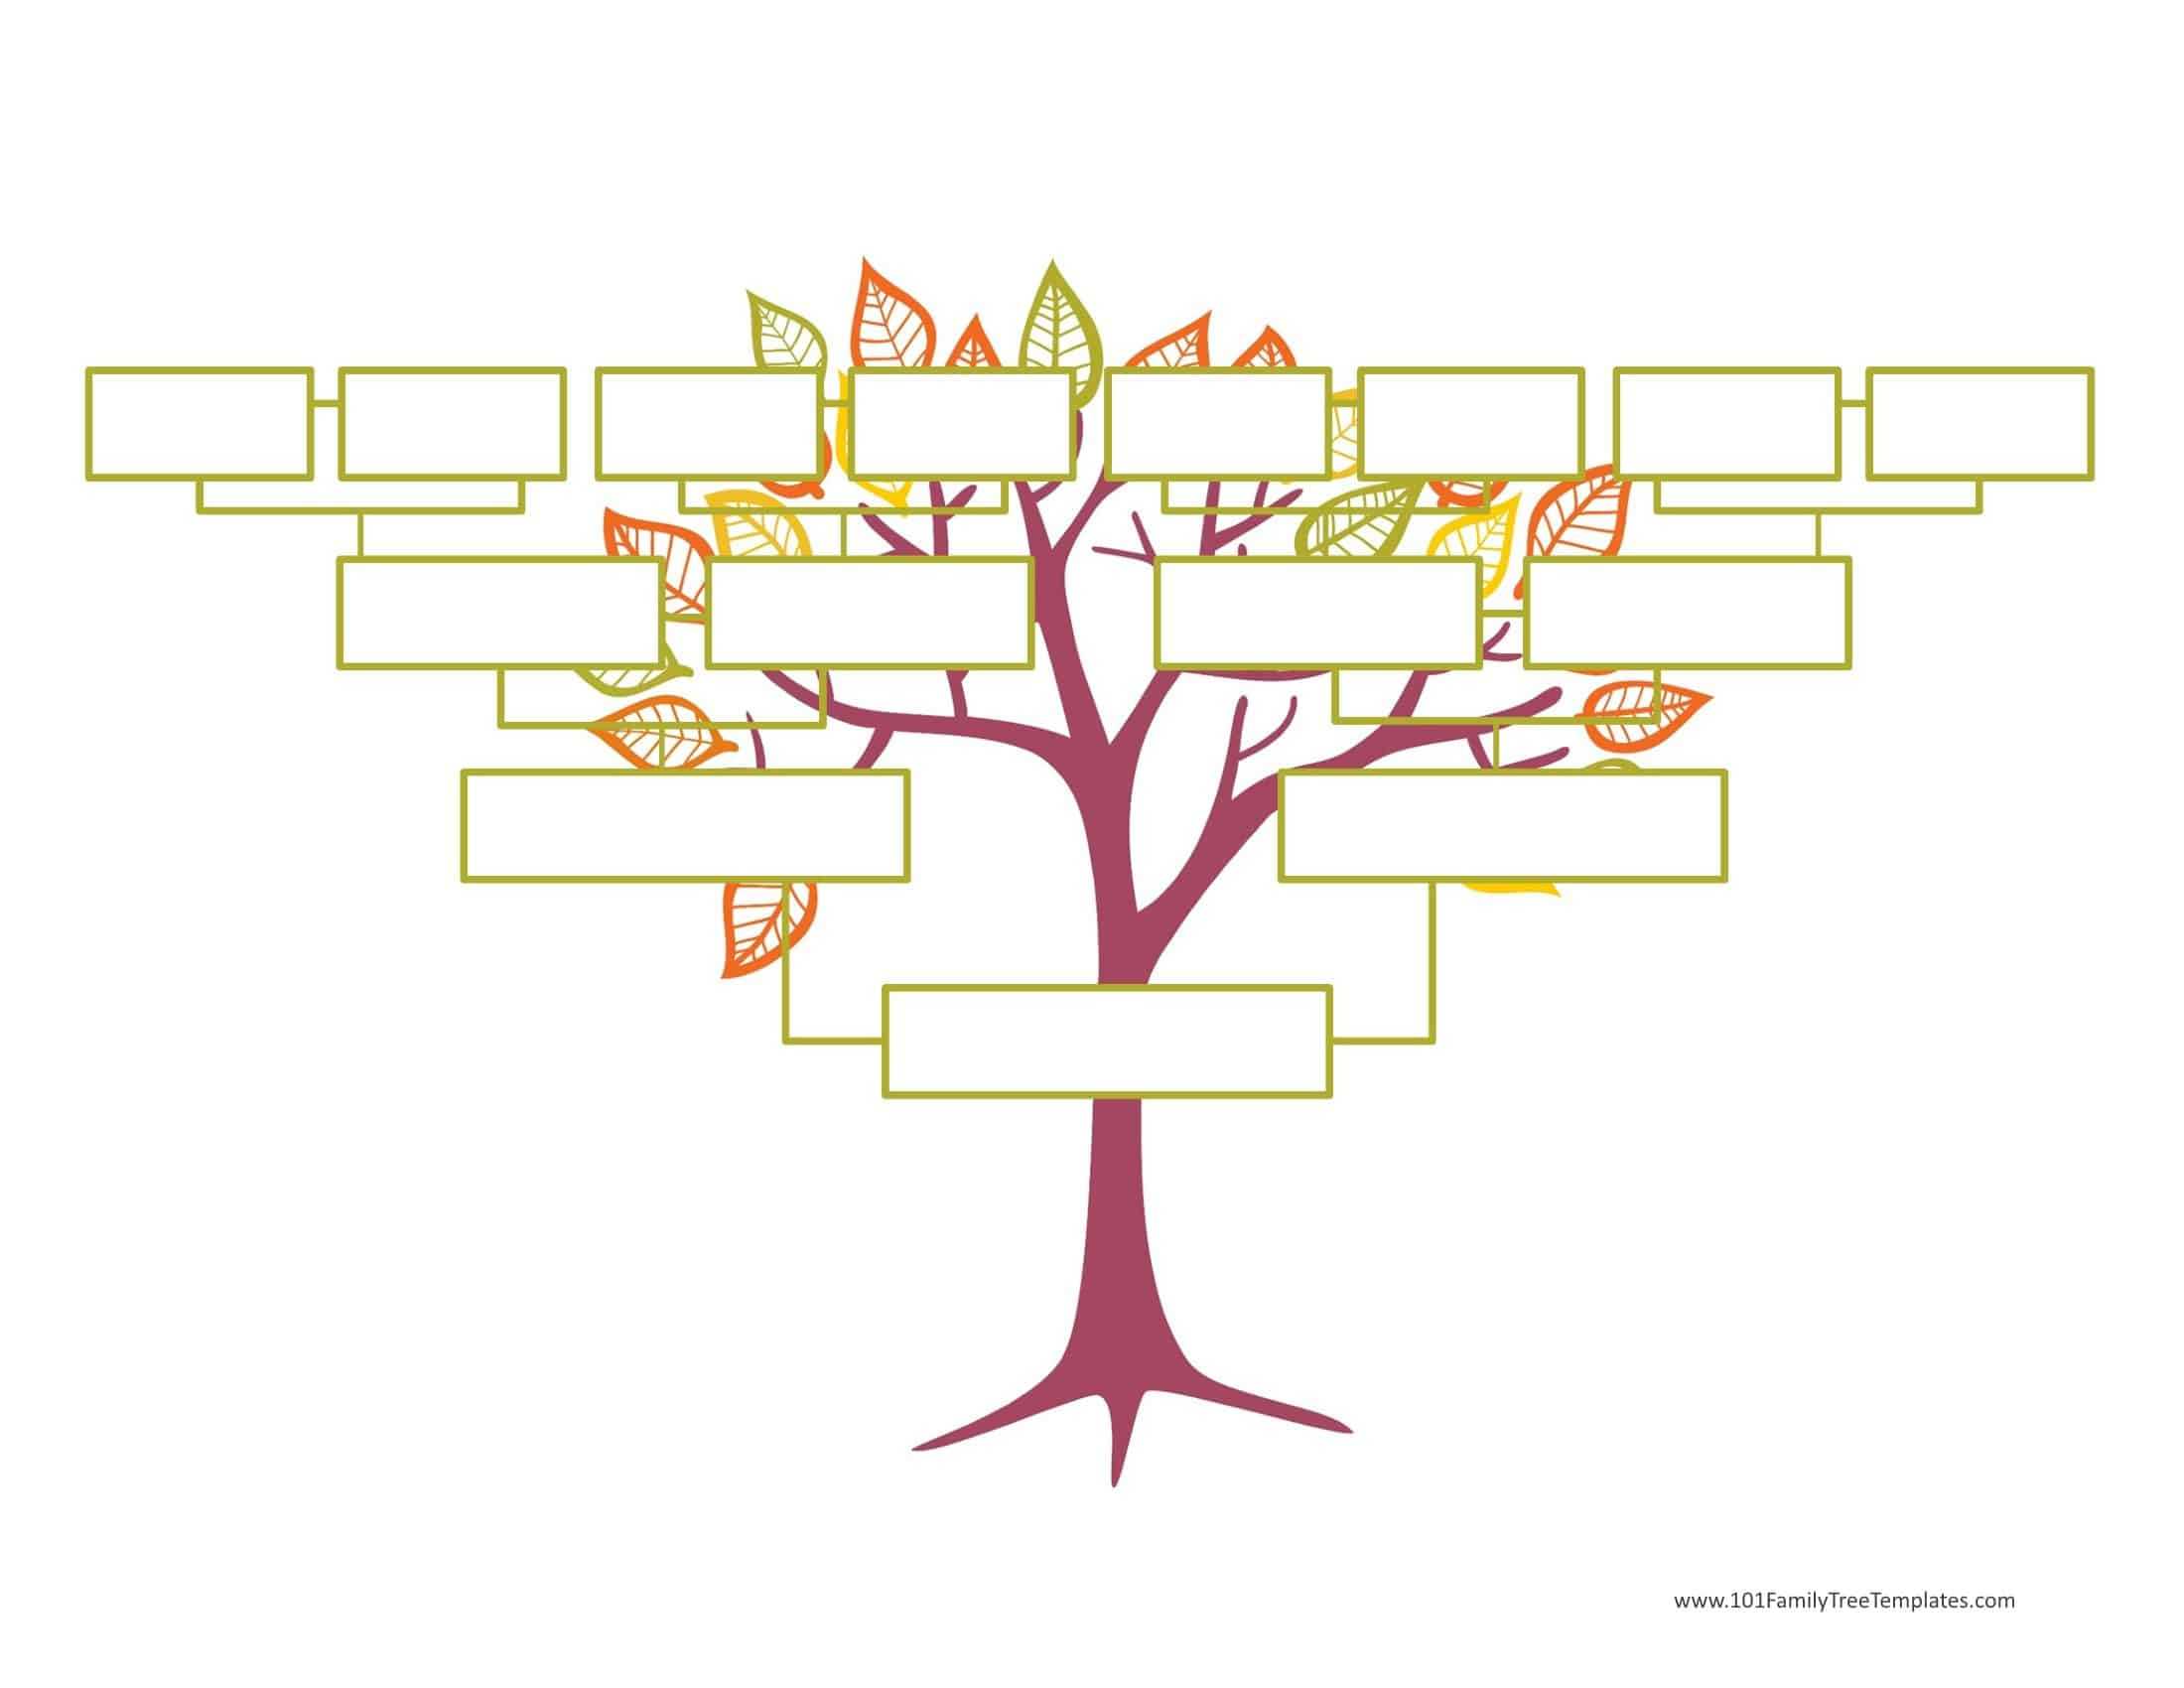 Blank Family Tree Template | Free Instant Download In Blank Tree Diagram Template